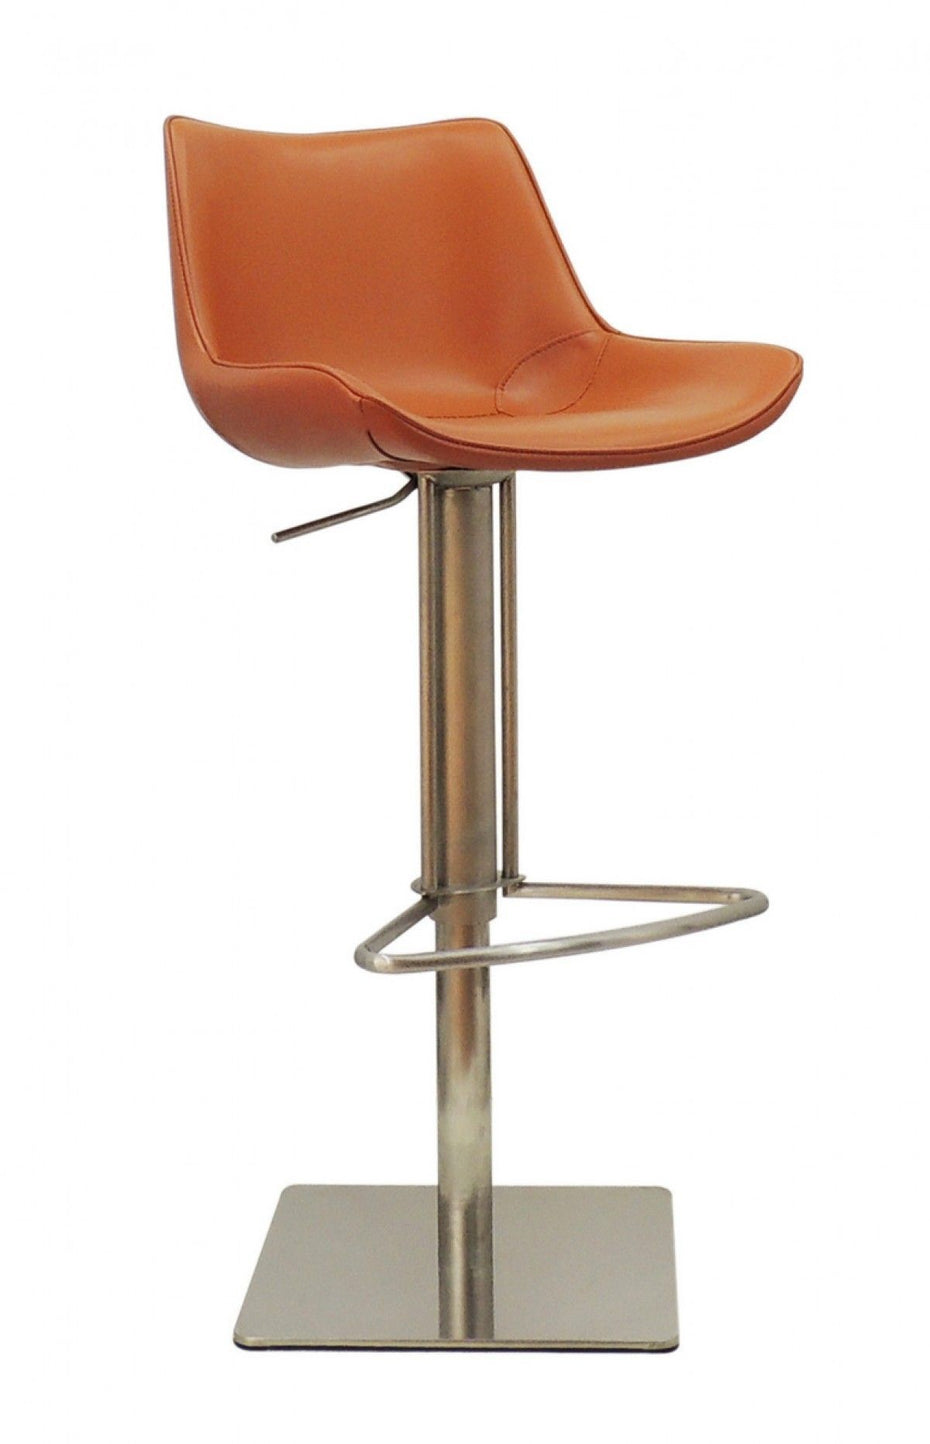 Faux Leather And Stainless Steel Swivel Adjustable Height Bar Chair With Footrest 42" - Cognac